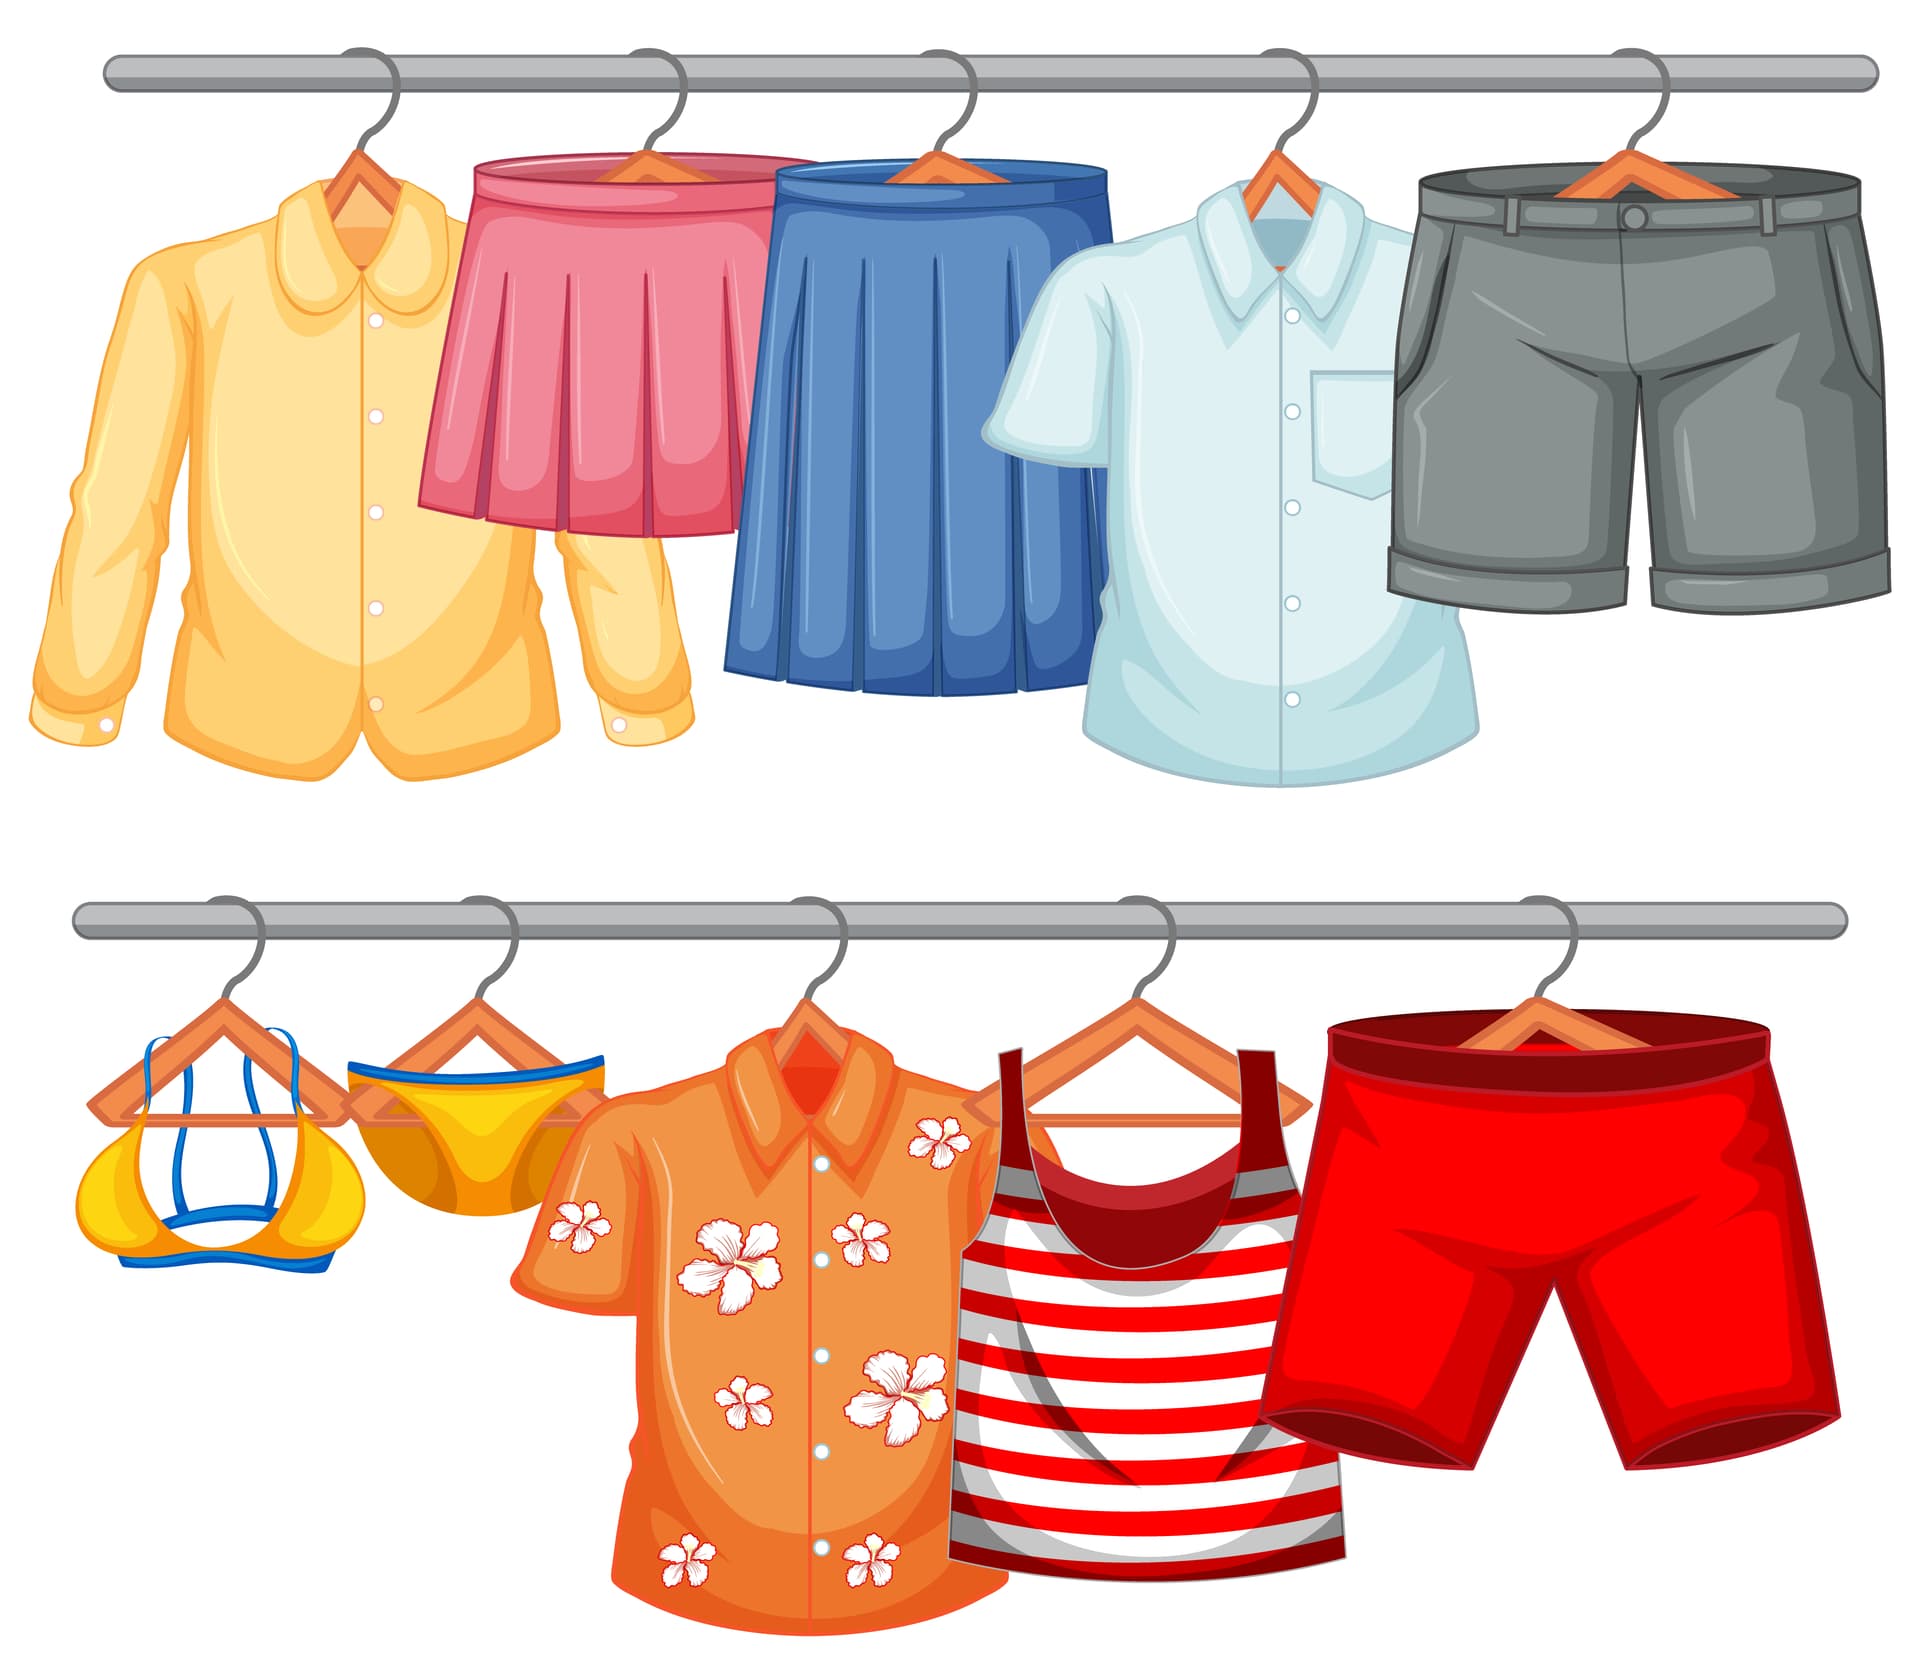 Articles Of Clothing Clipart